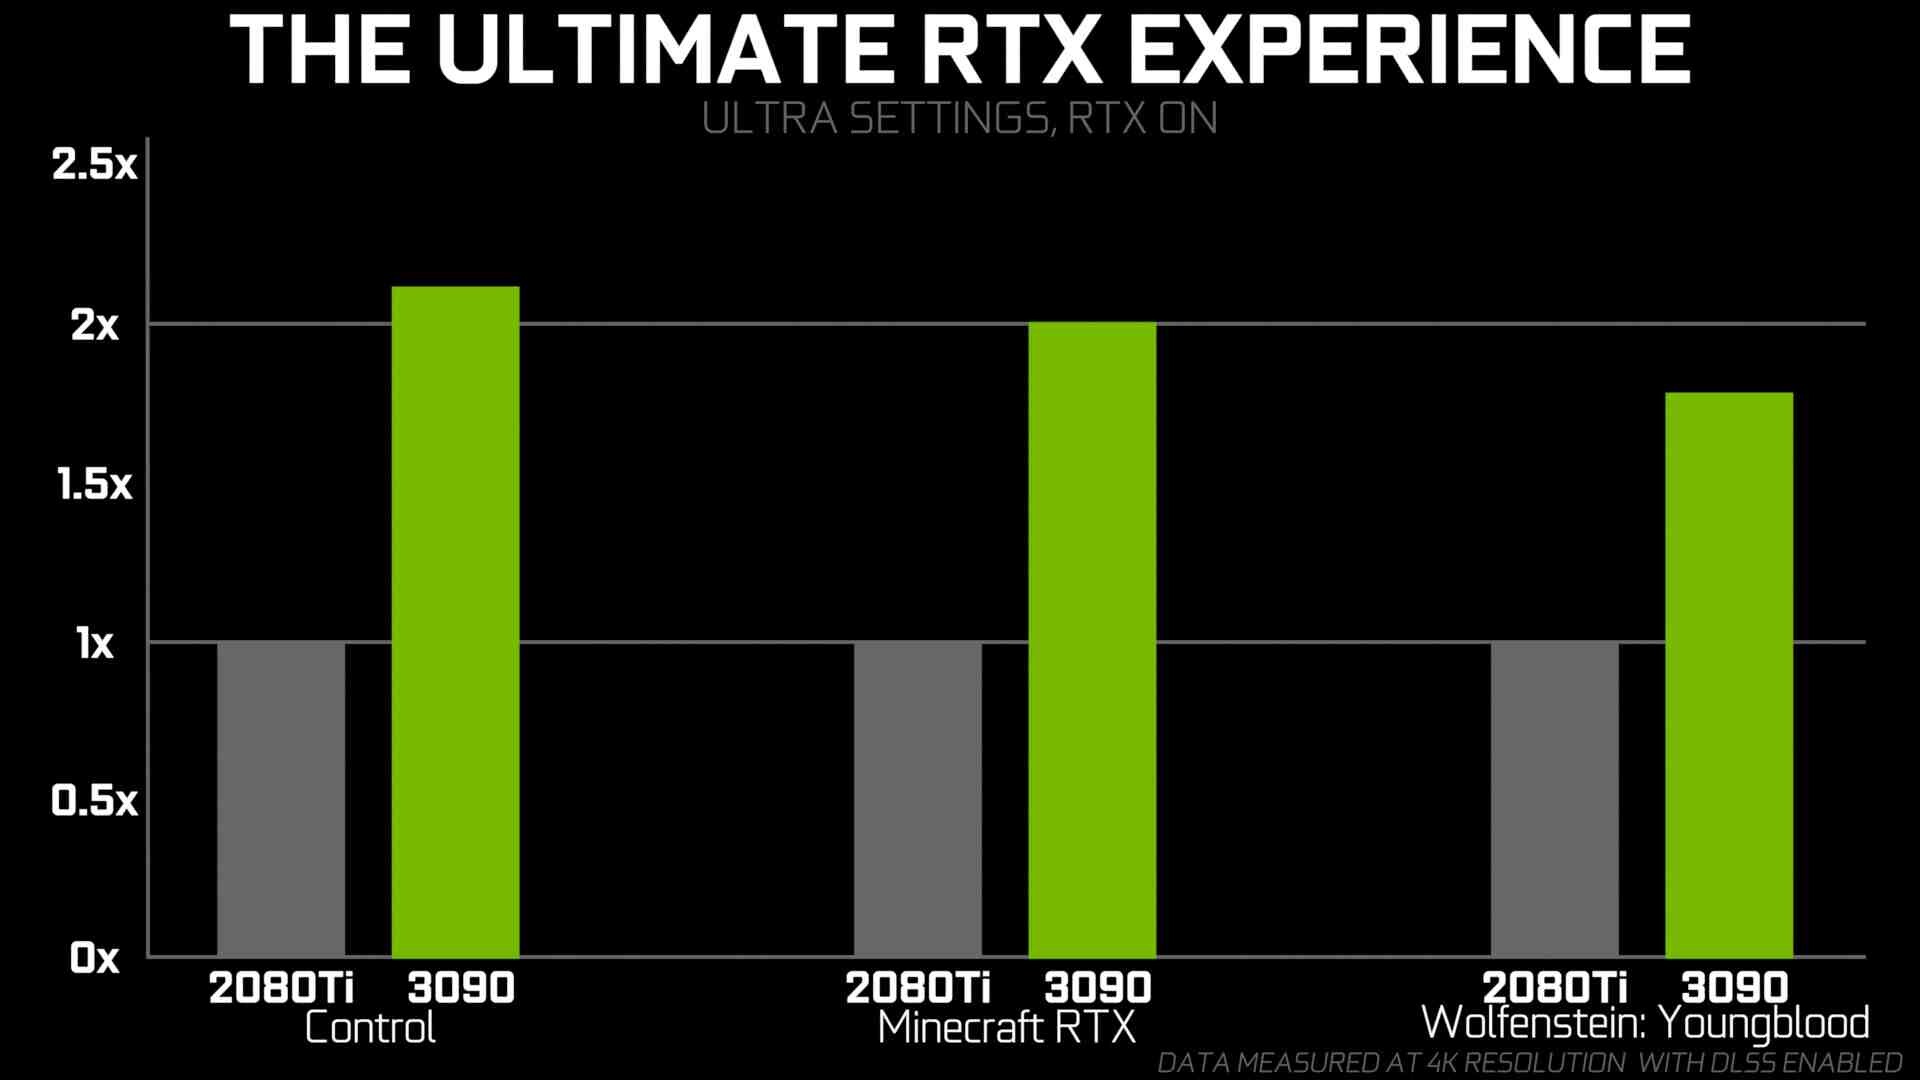 Rumored RTX 4080 Super Gains Early Support in HWINFO